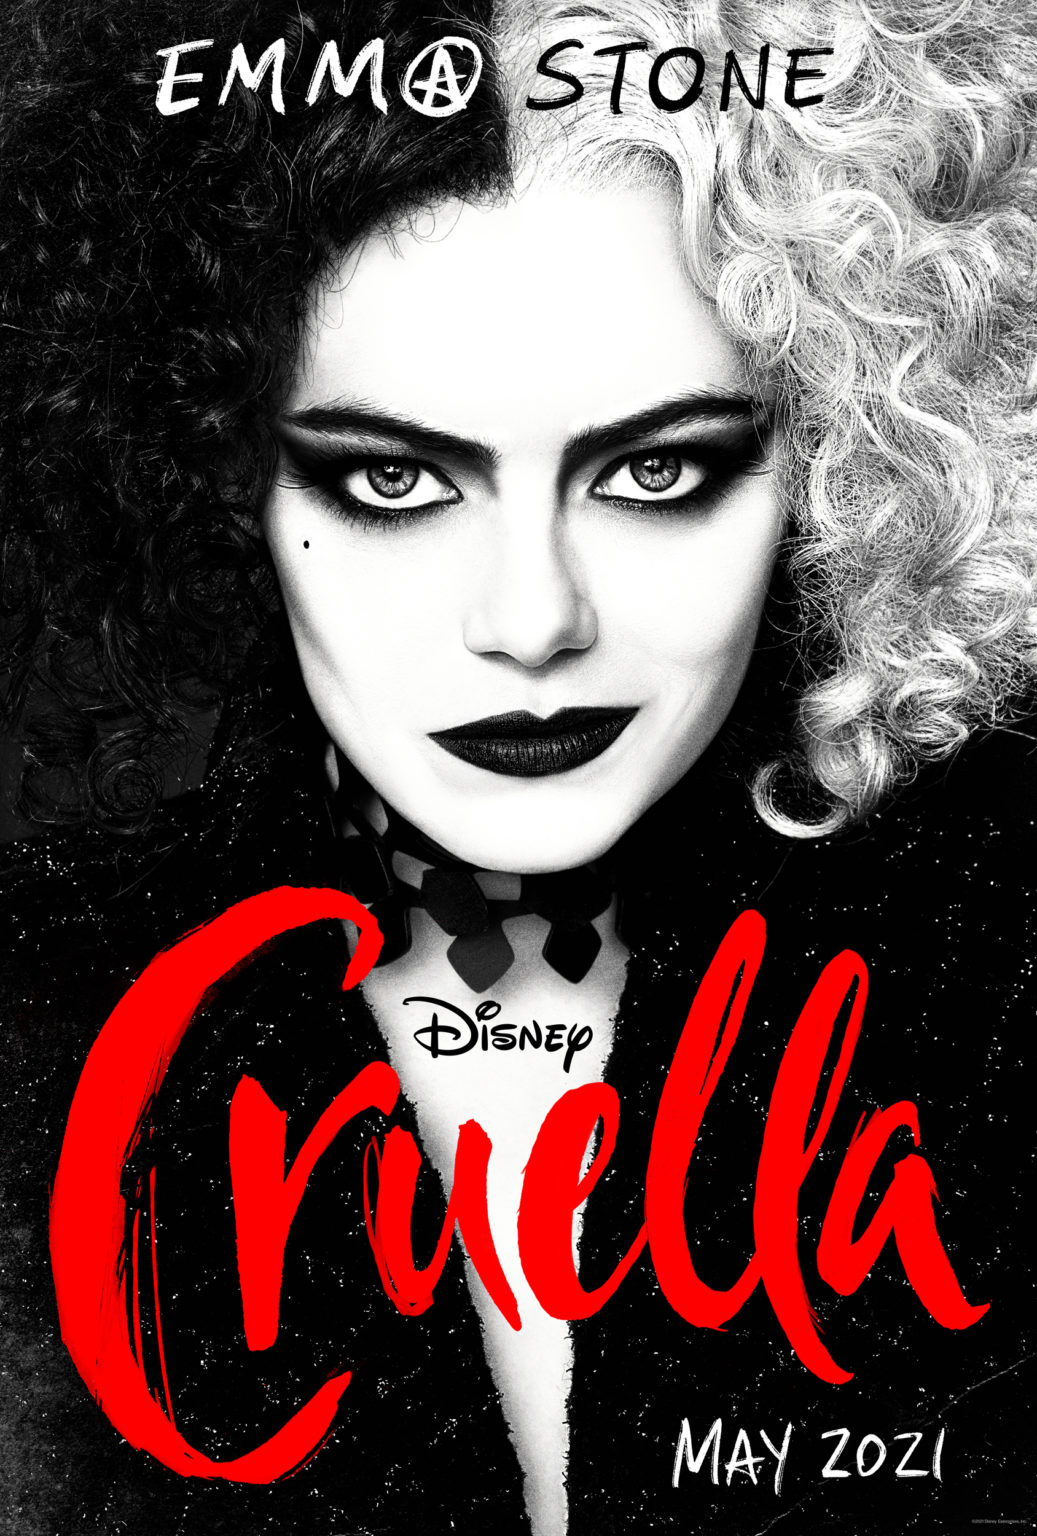 Trailer For Disney's Cruella Shows A Young Woman That Is "A Little Bit Mad" - LRM